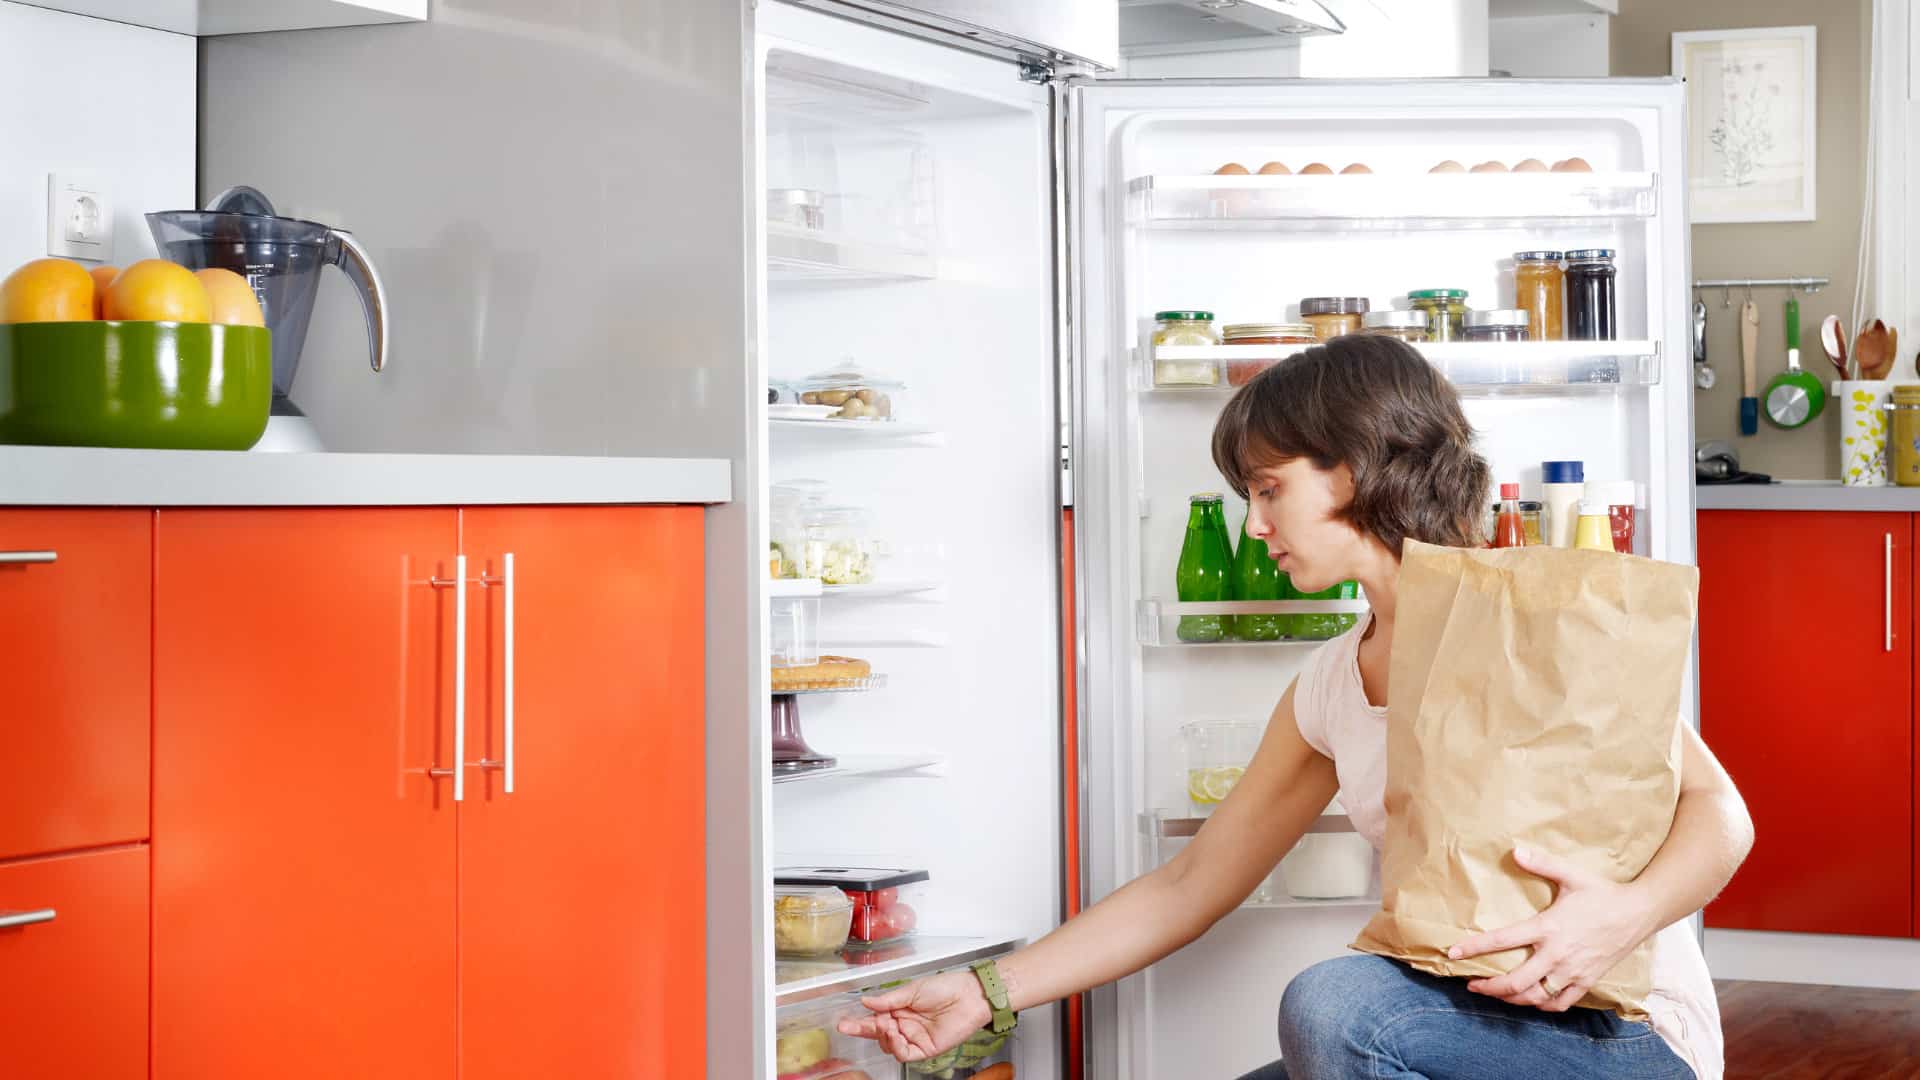 Featured image for “The Vital Role of Keeping Your Refrigerator Closed”